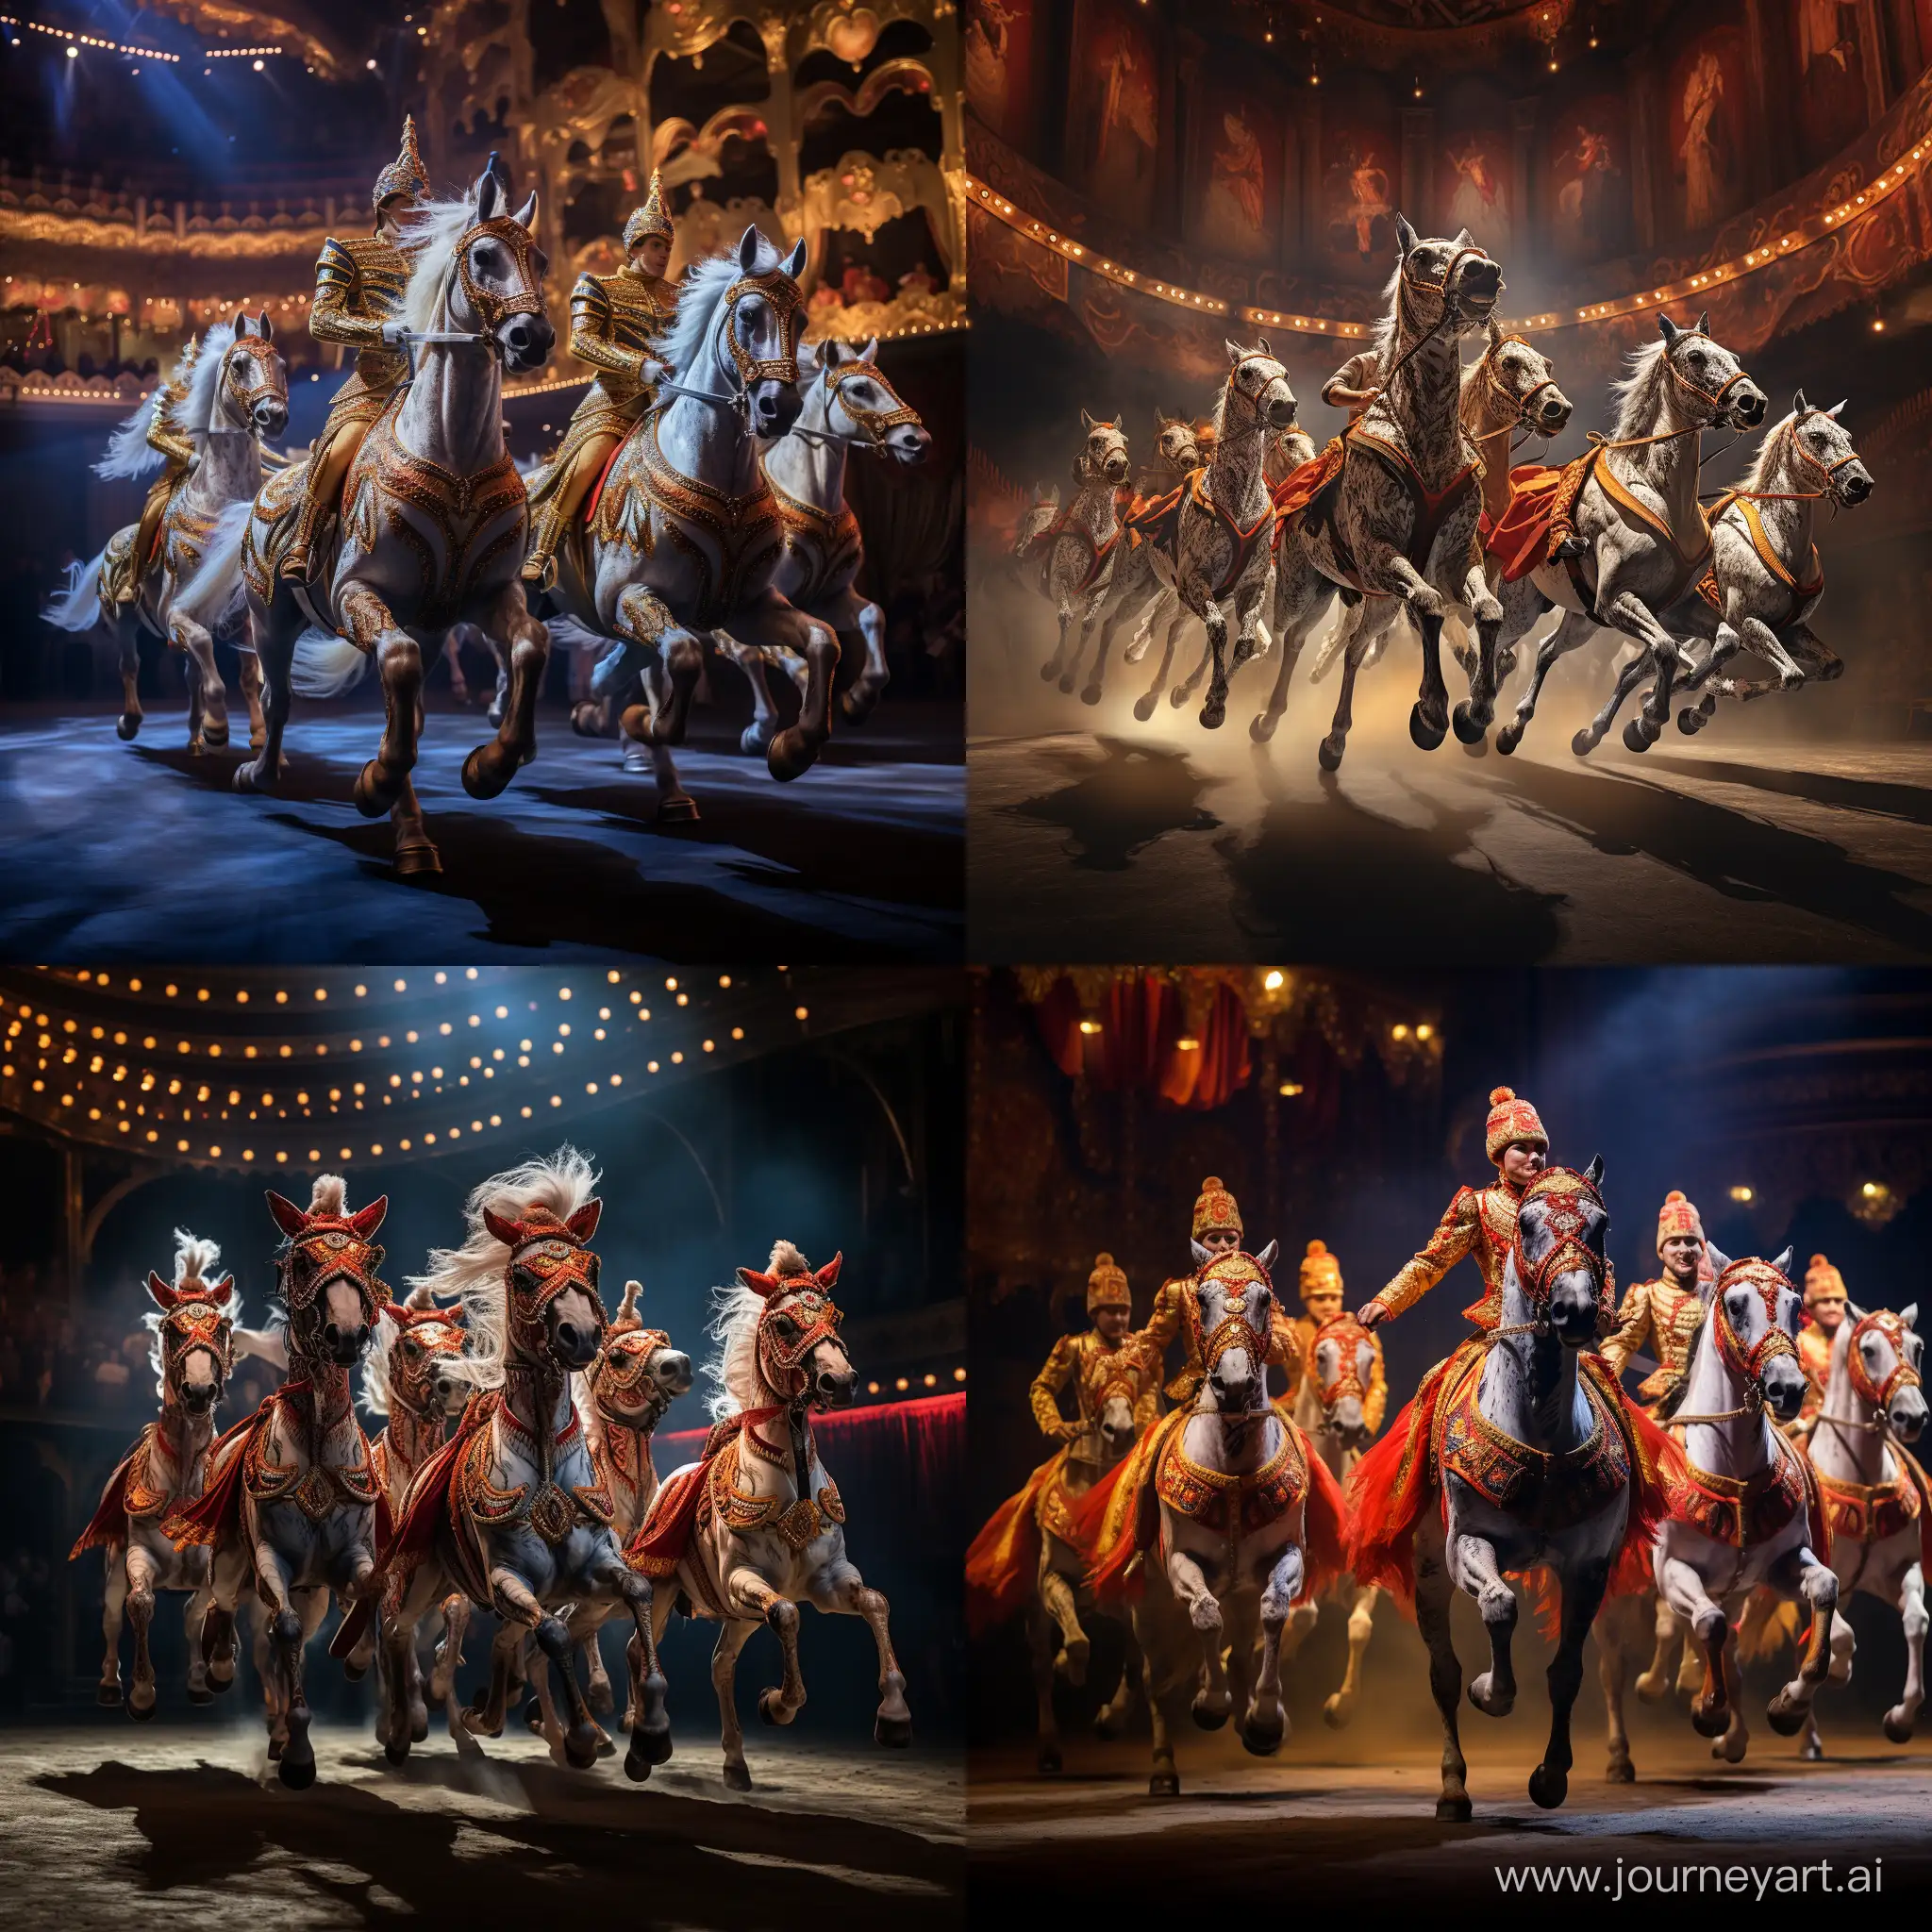 Equestrian-Theater-Spectacle-Vibrantly-Adorned-Horses-and-19thCentury-Costumes-in-Hyperrealistic-Display